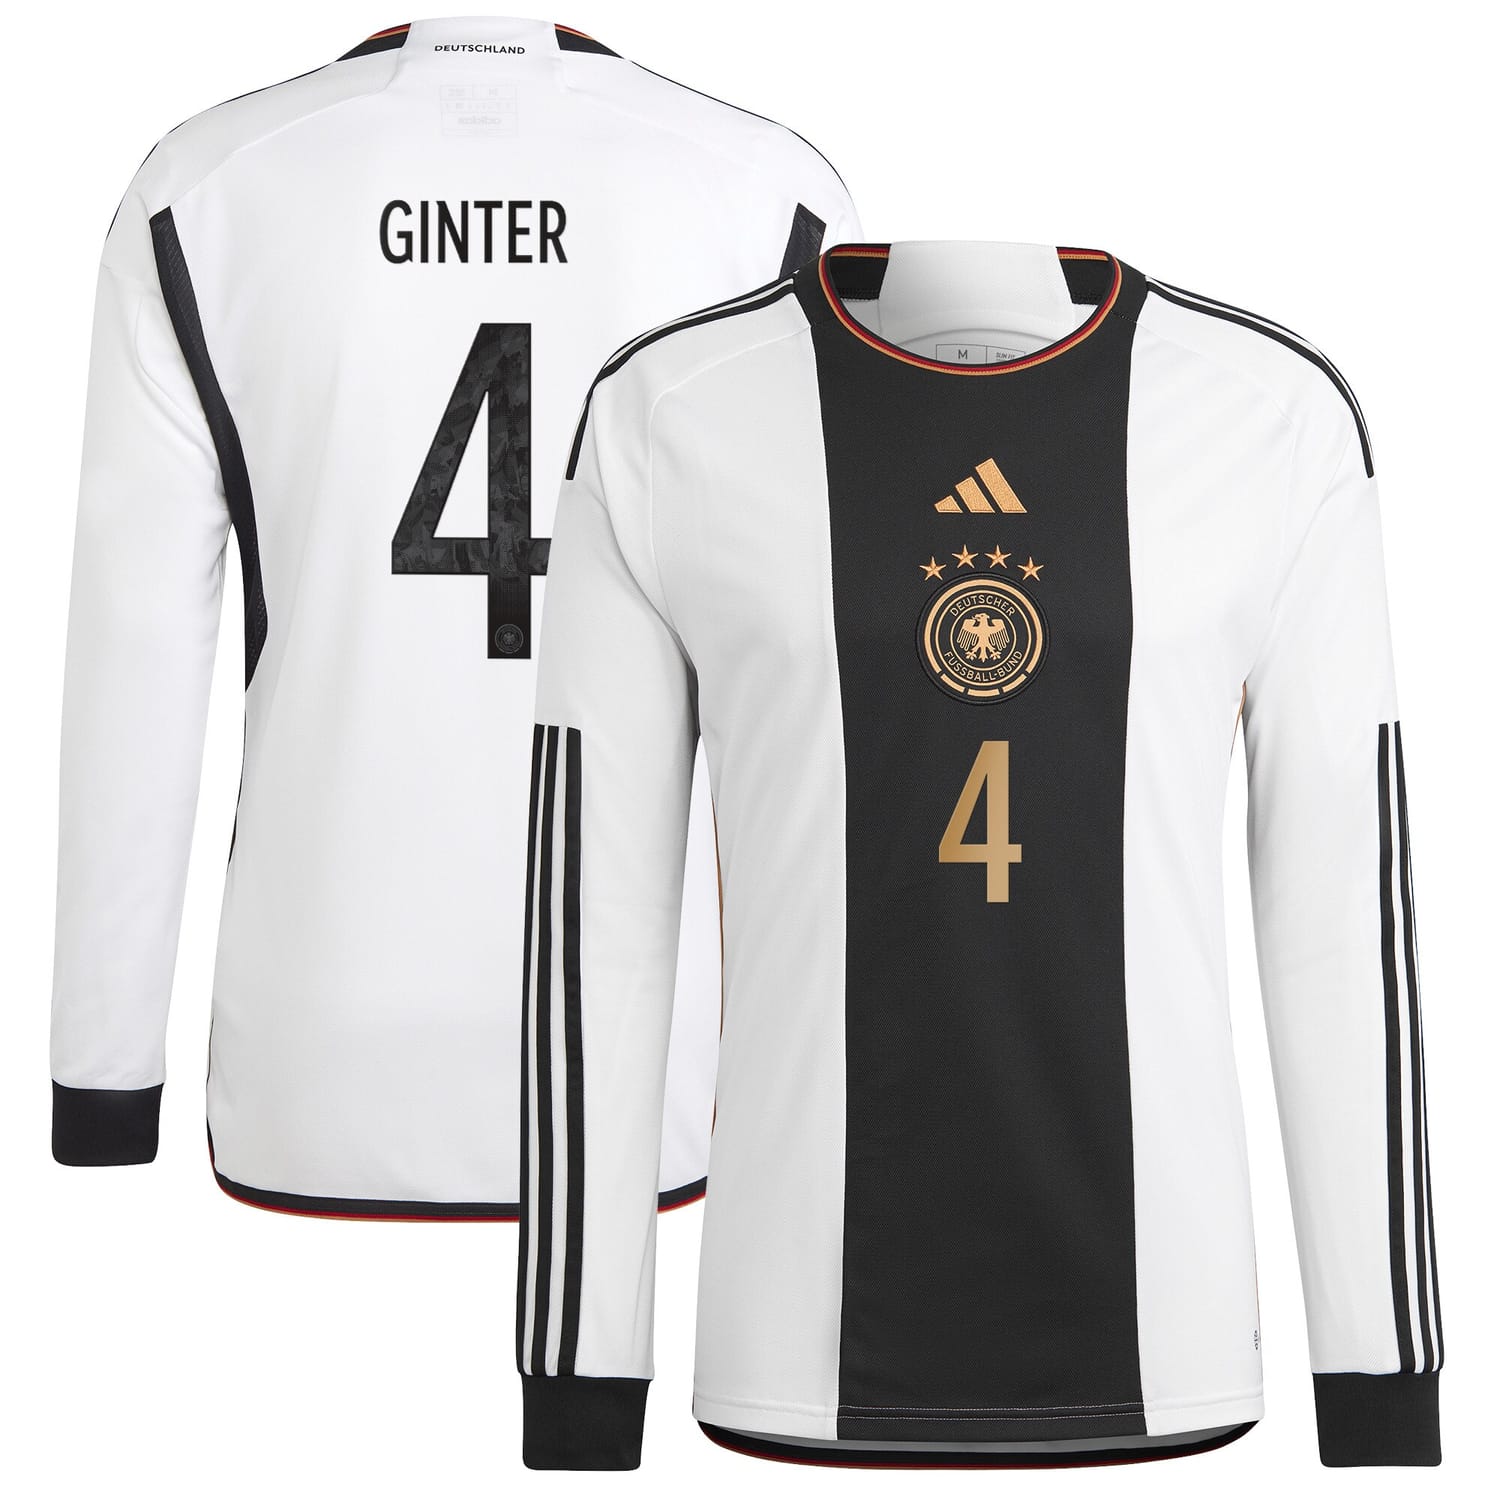 Germany National Team Home Jersey Shirt Long Sleeve player Matthias Ginter 4 printing for Men